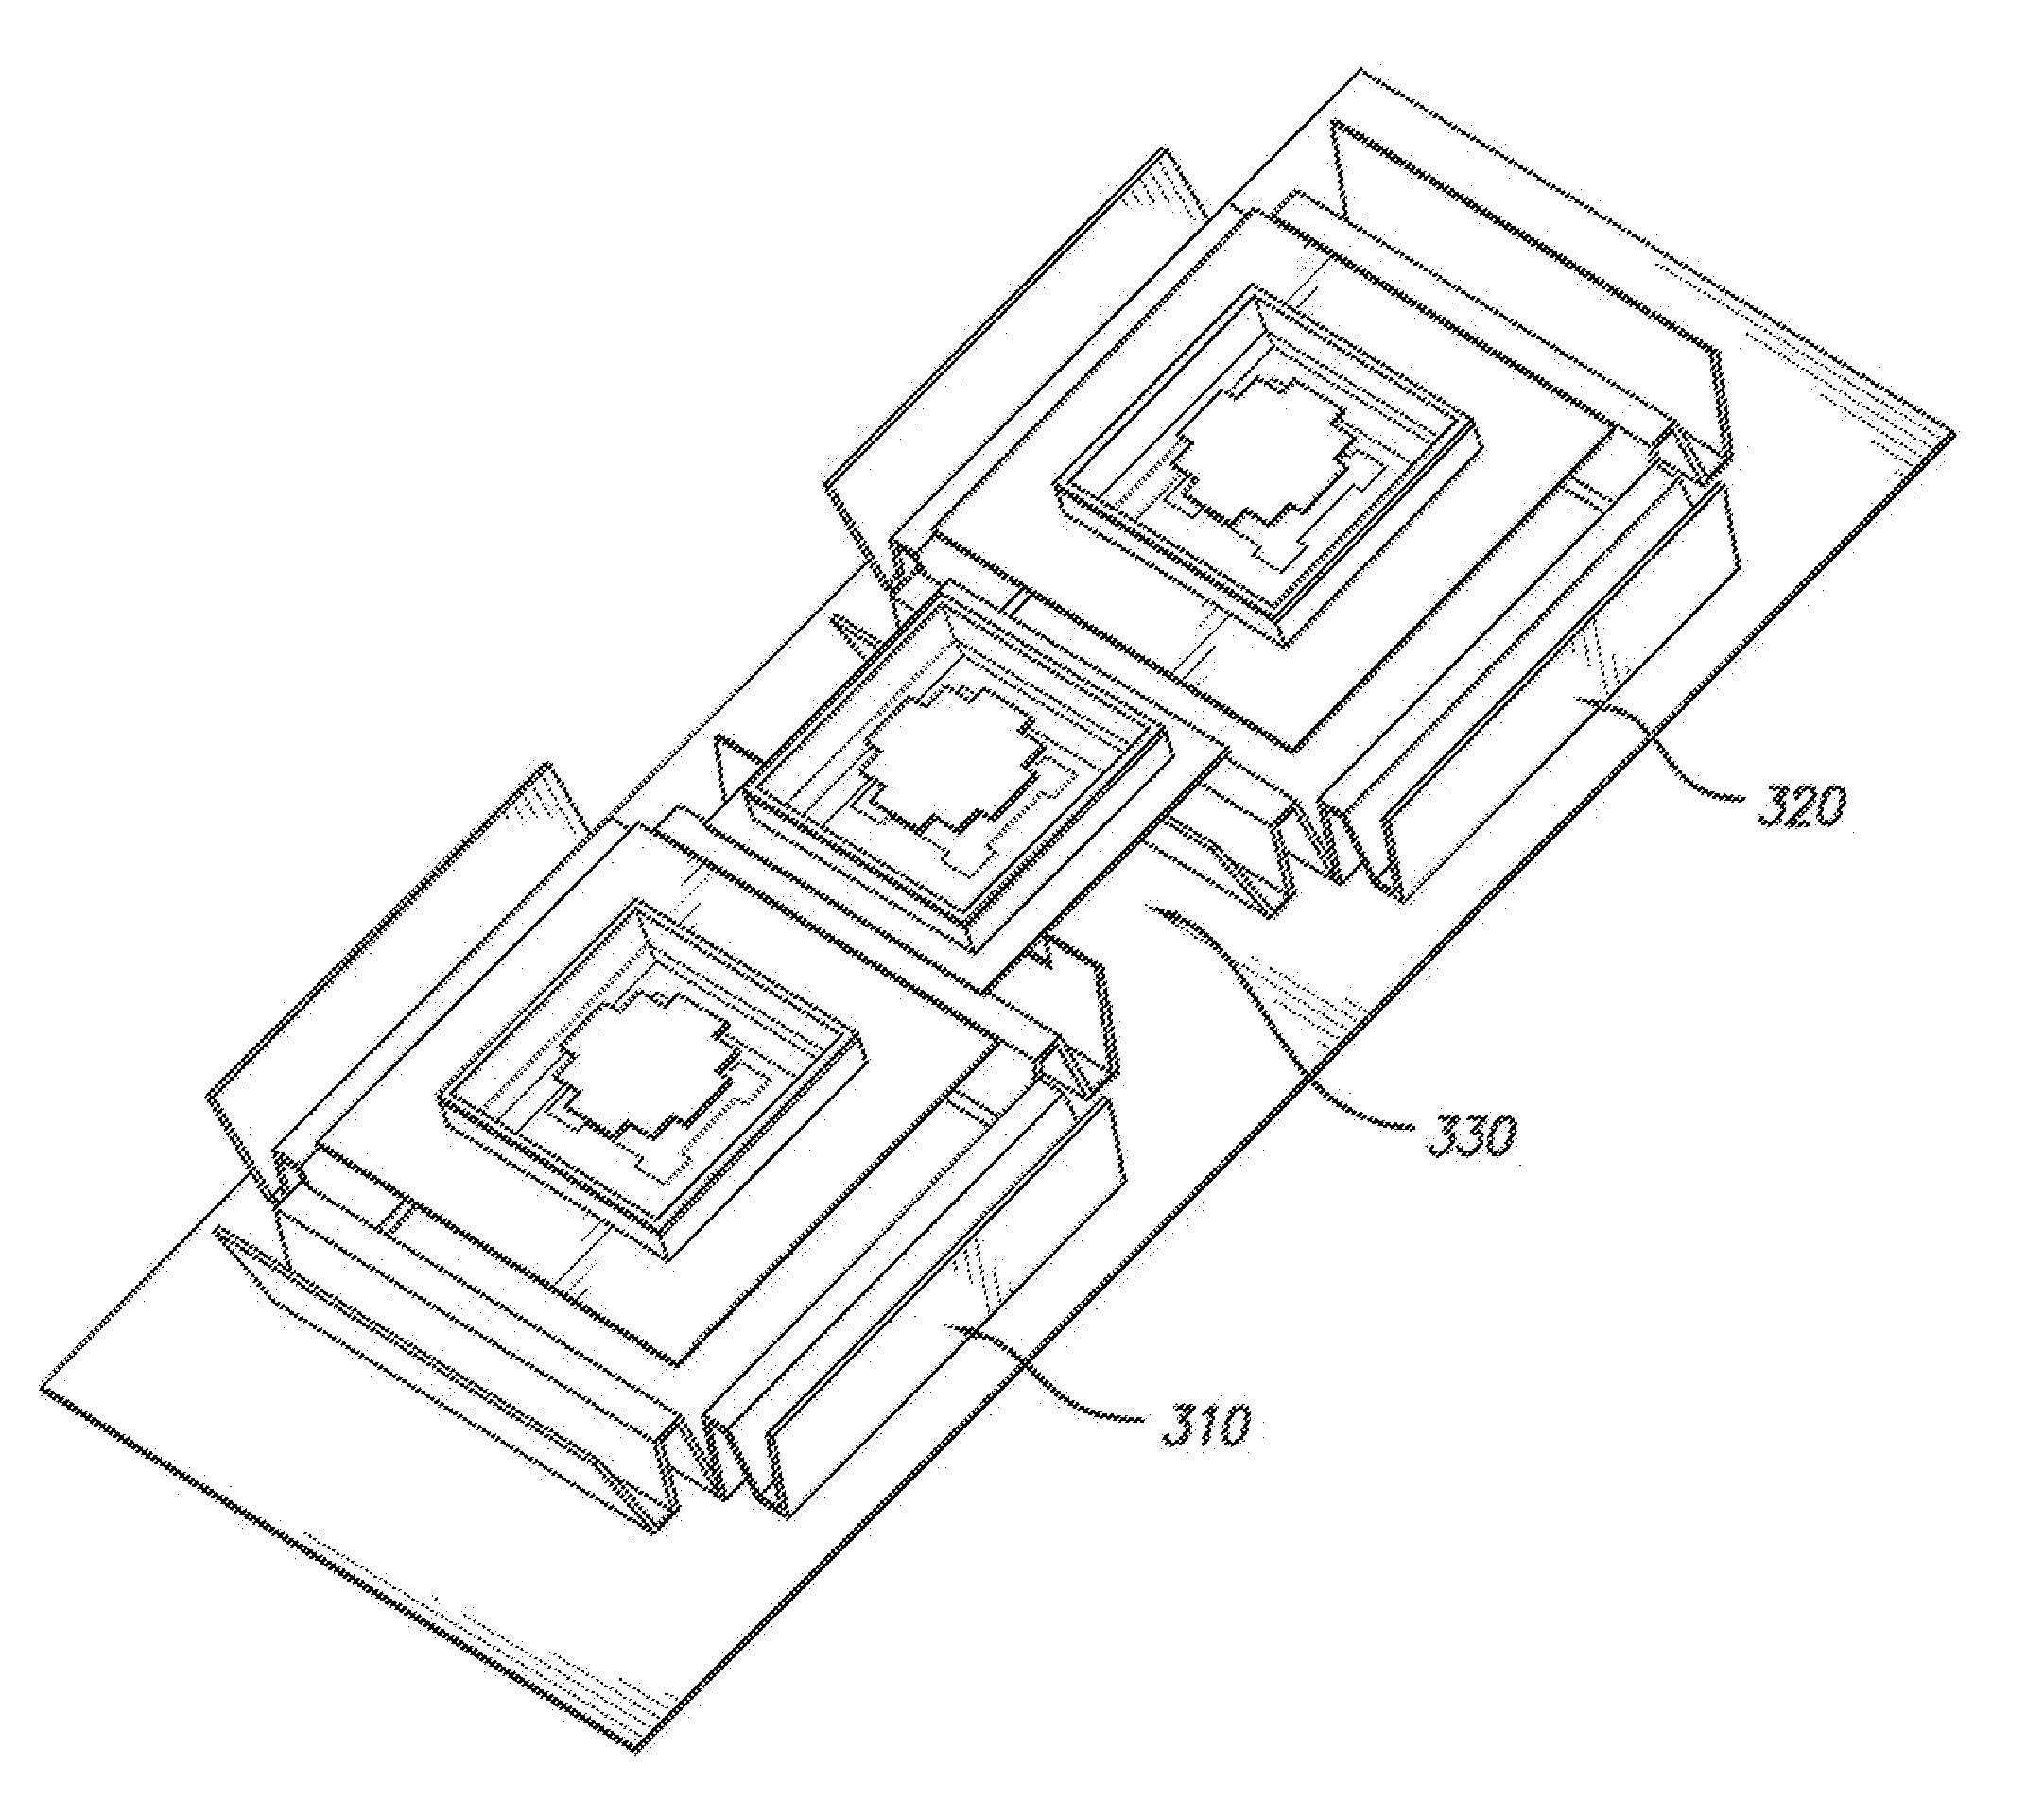 Dual-polarized dual-band broad beamwidth directive patch antenna